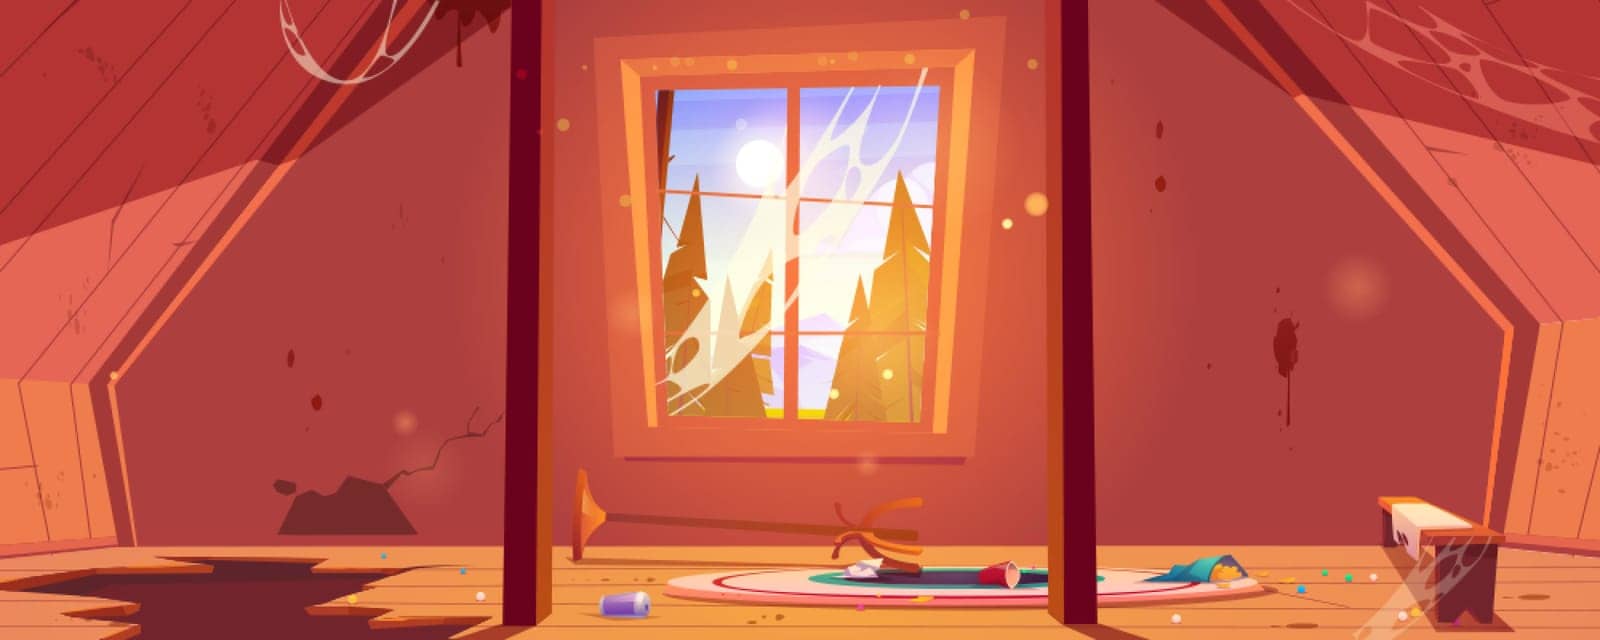 Old attic in abandoned house with mountains and trees behind window. Vector cartoon interior of garret room with broken wooden floor, clutter and spiderweb. Empty messy mansard